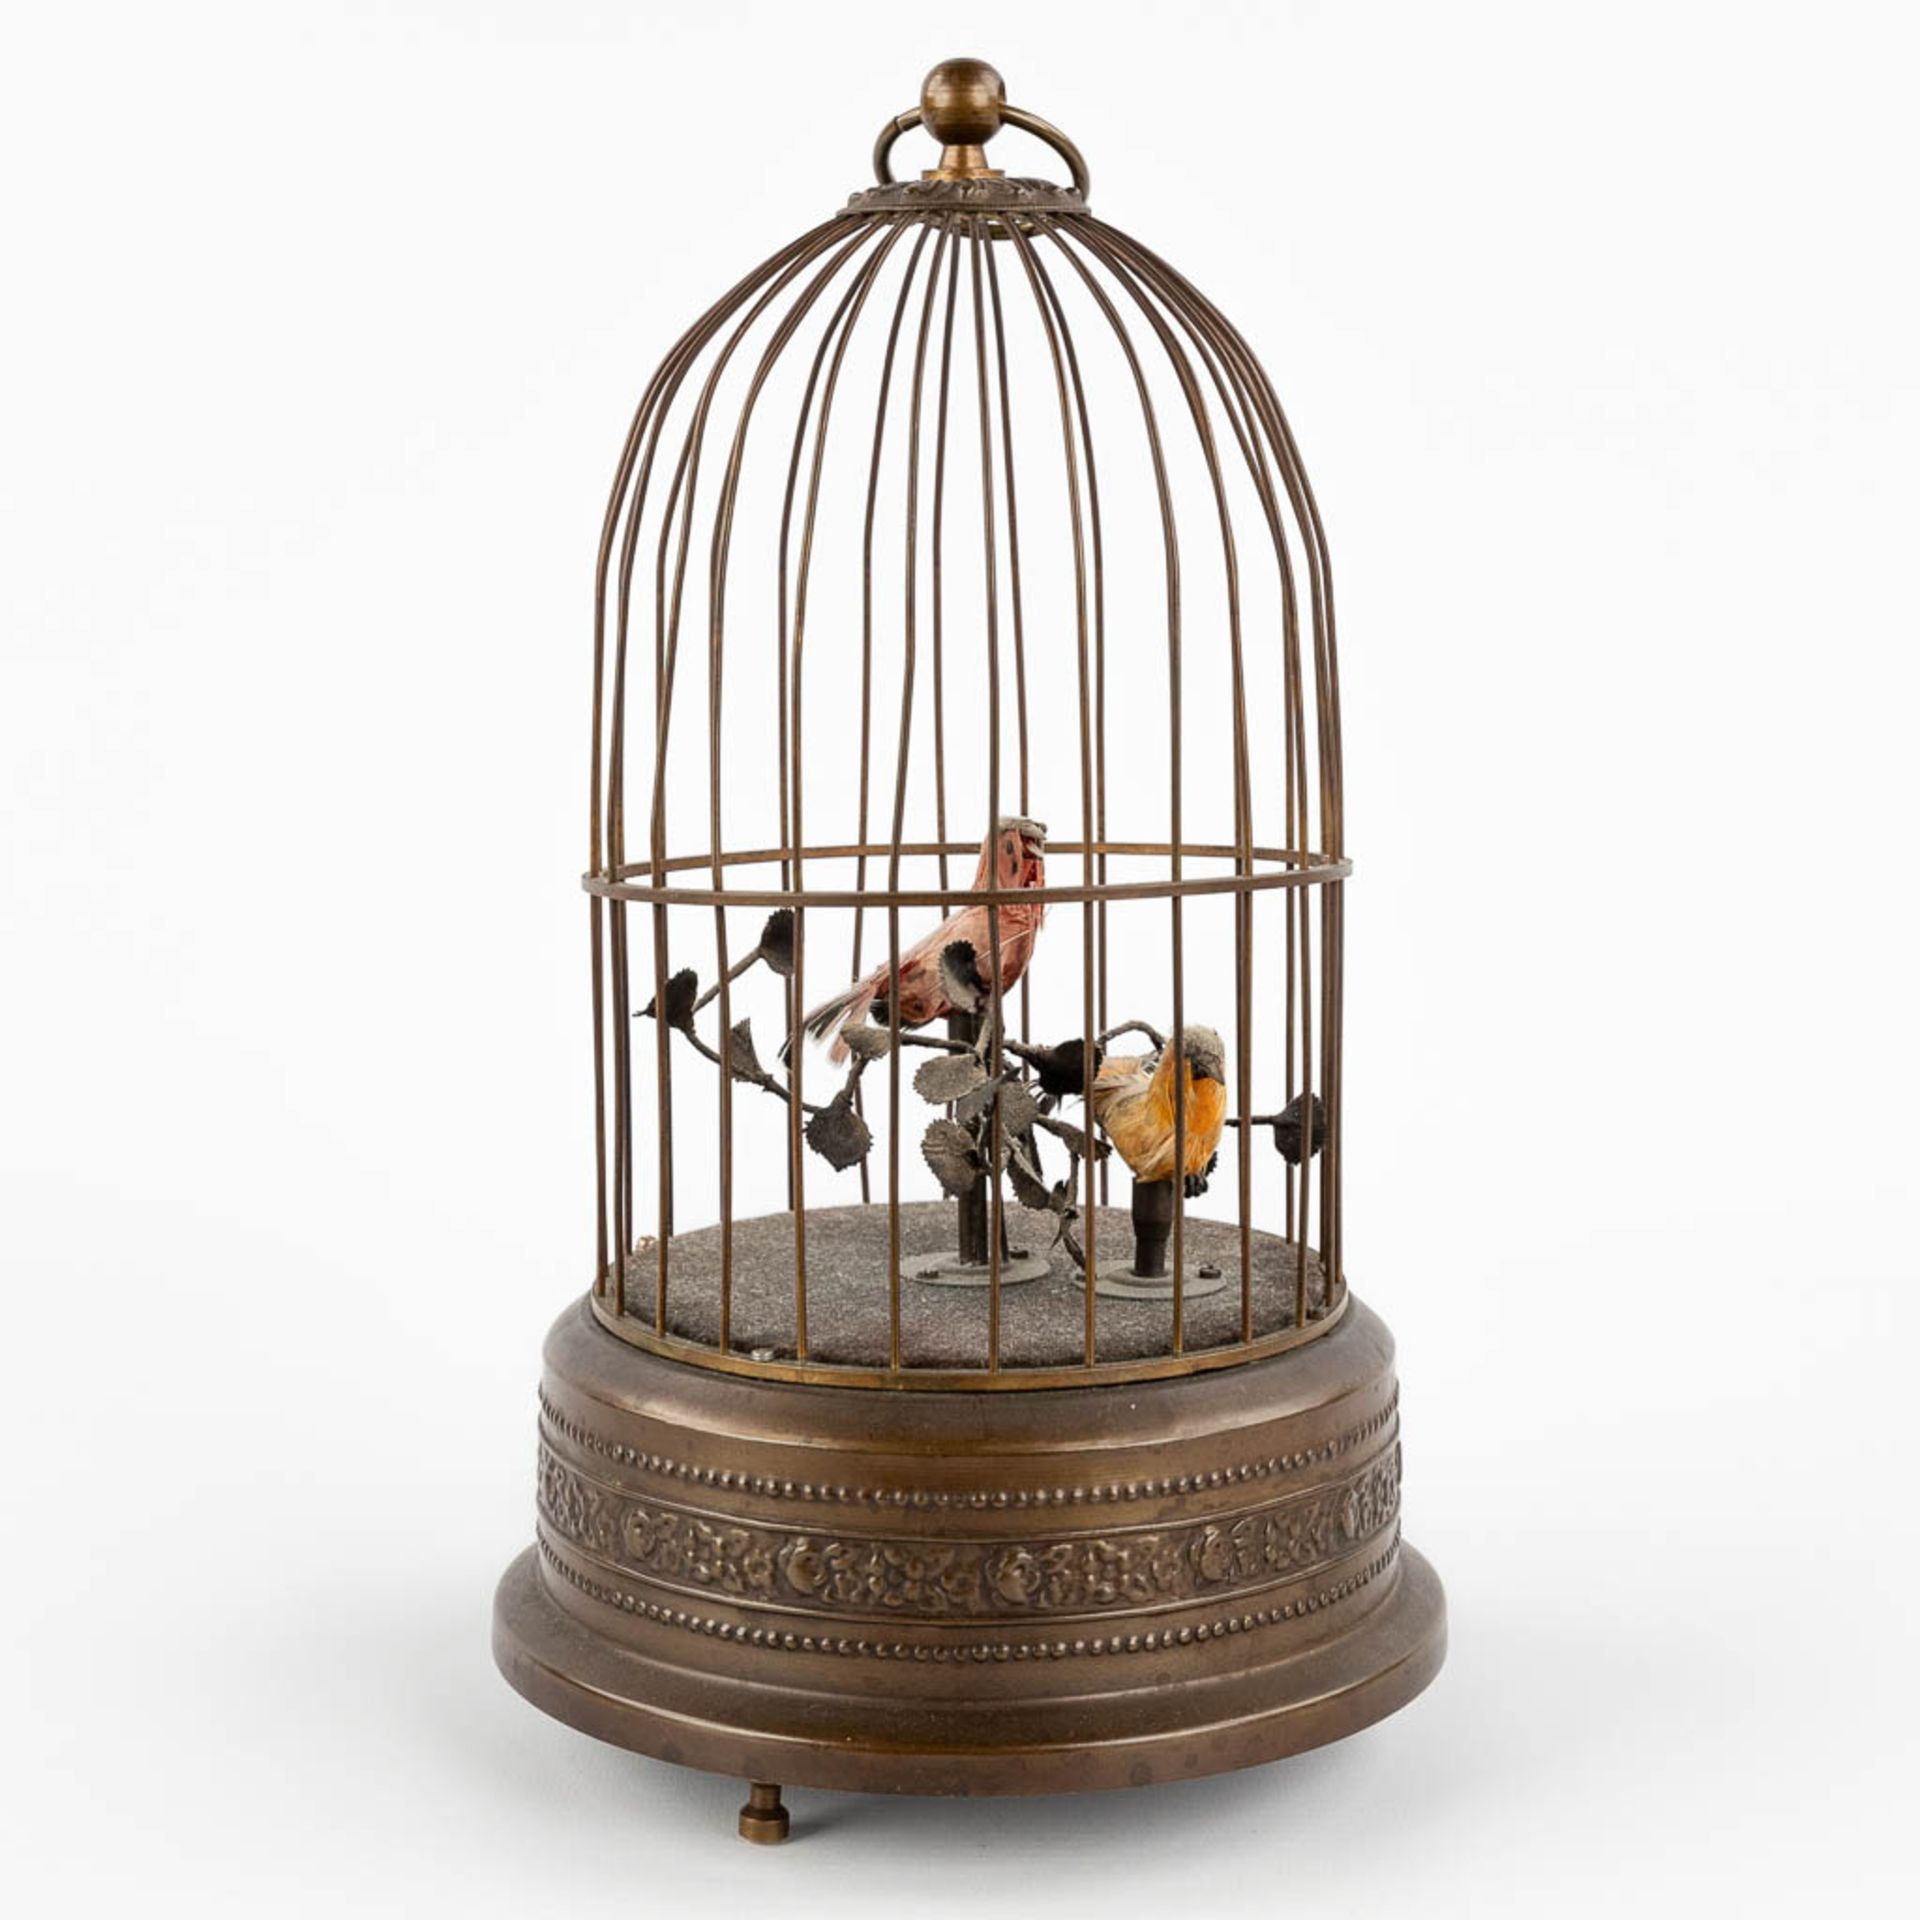 A bird cage automata with a music box. (H:28 x D:15,5 cm) - Image 3 of 12